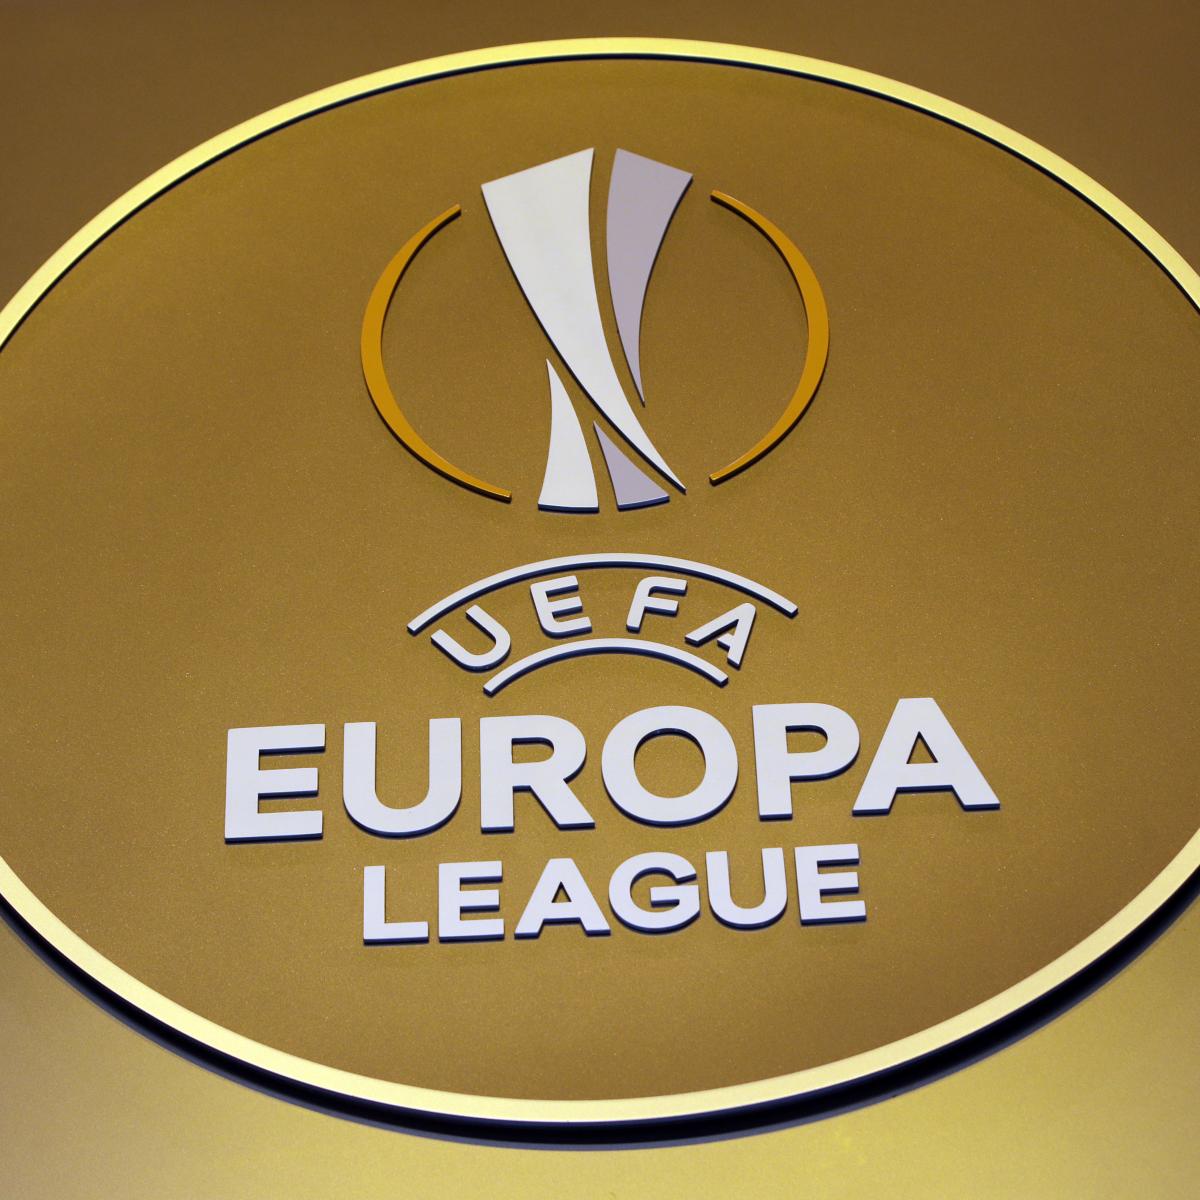 Europa League Draw 2018-19: Schedule of Dates for Group Stage Fixtures